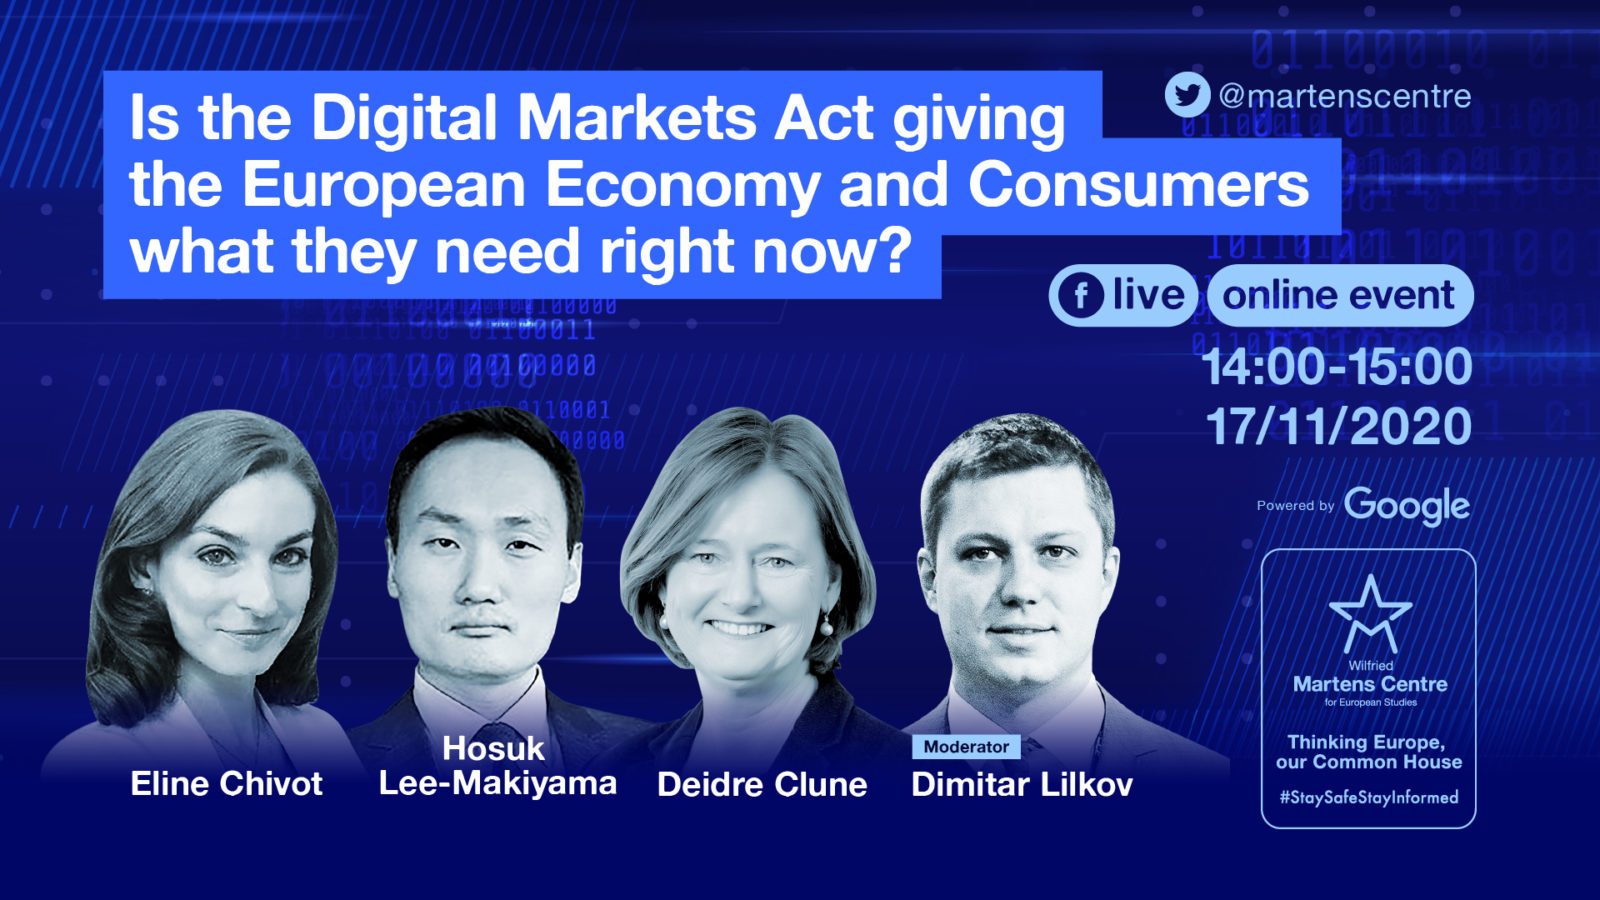 Is the Digital Markets Act giving the European Economy and Consumers what they need right now?